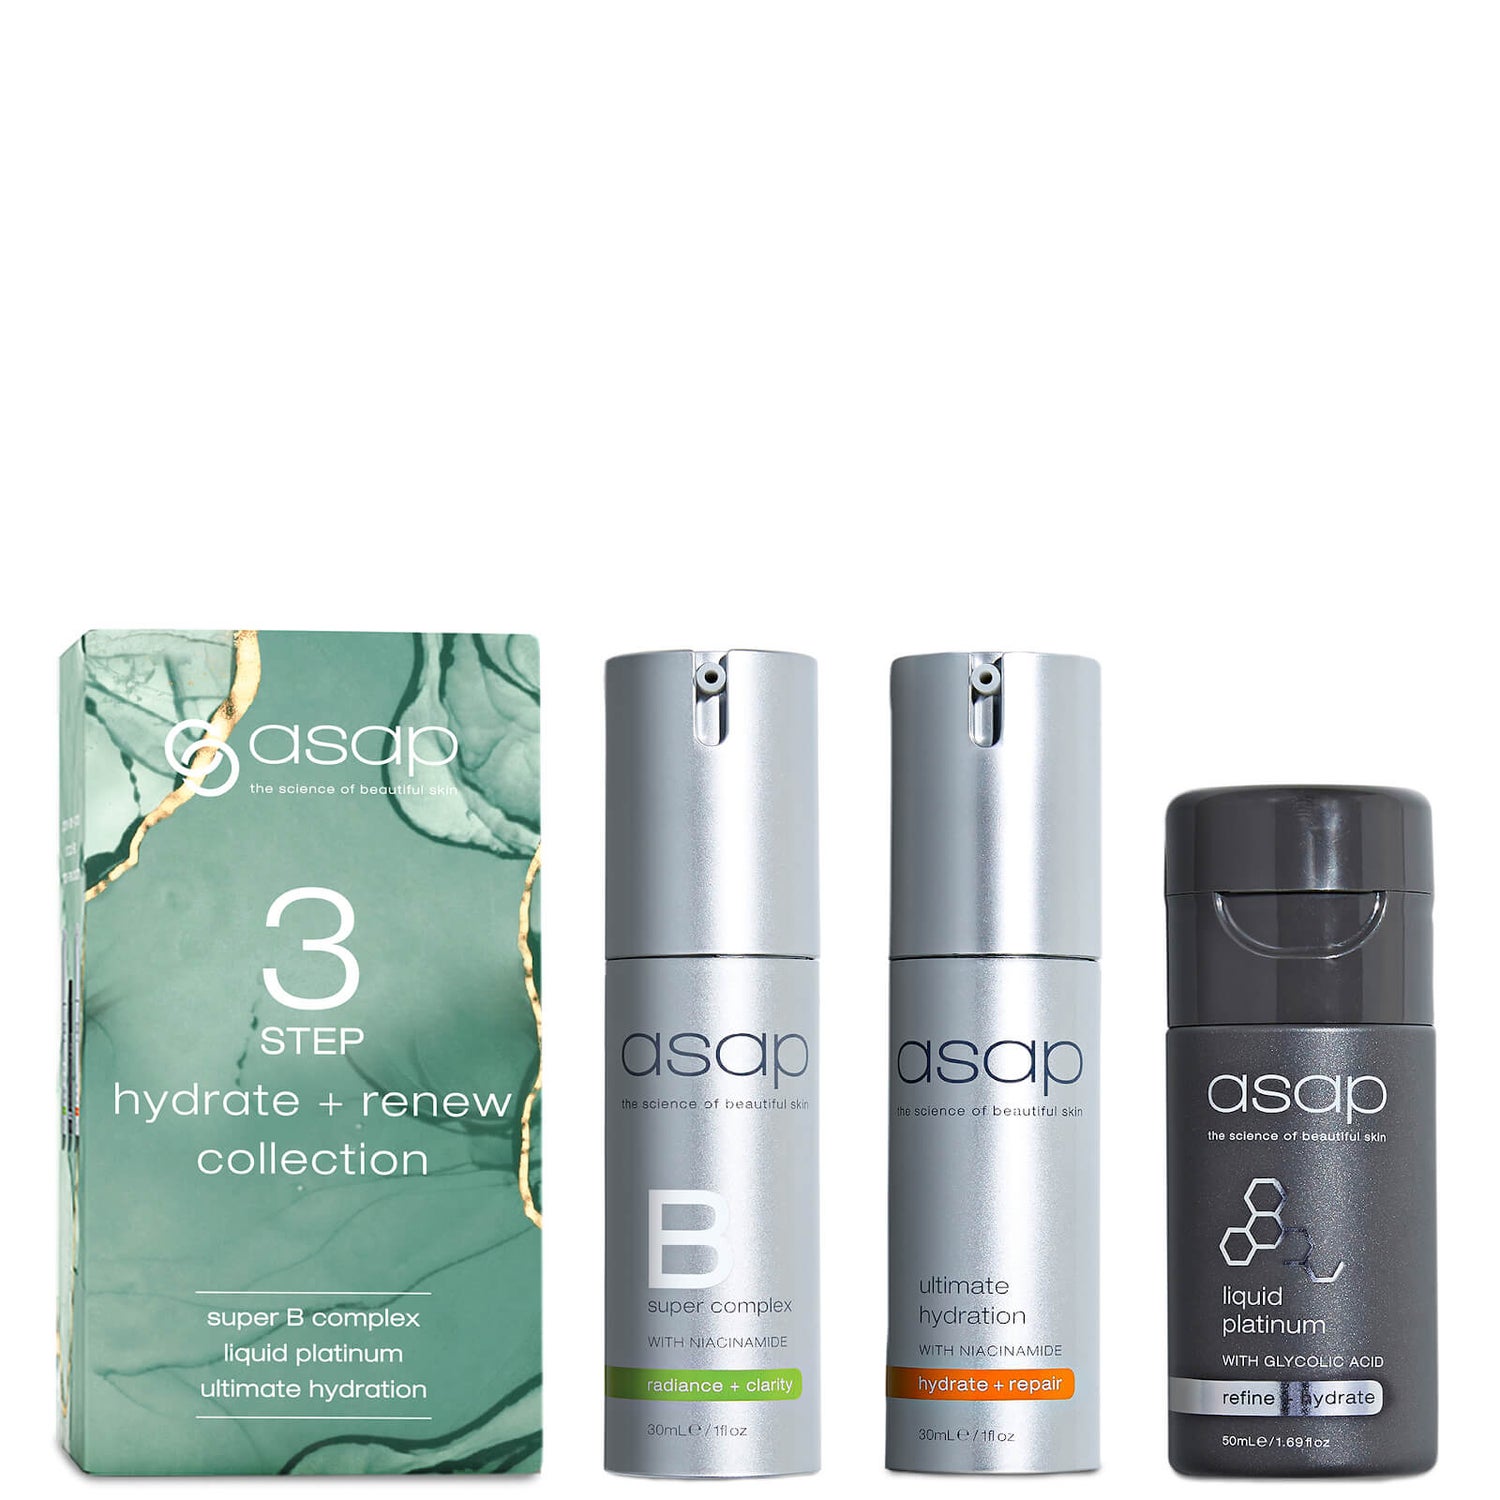 asap 3 Step Hydrate and Renew Collection (Worth $223.00)